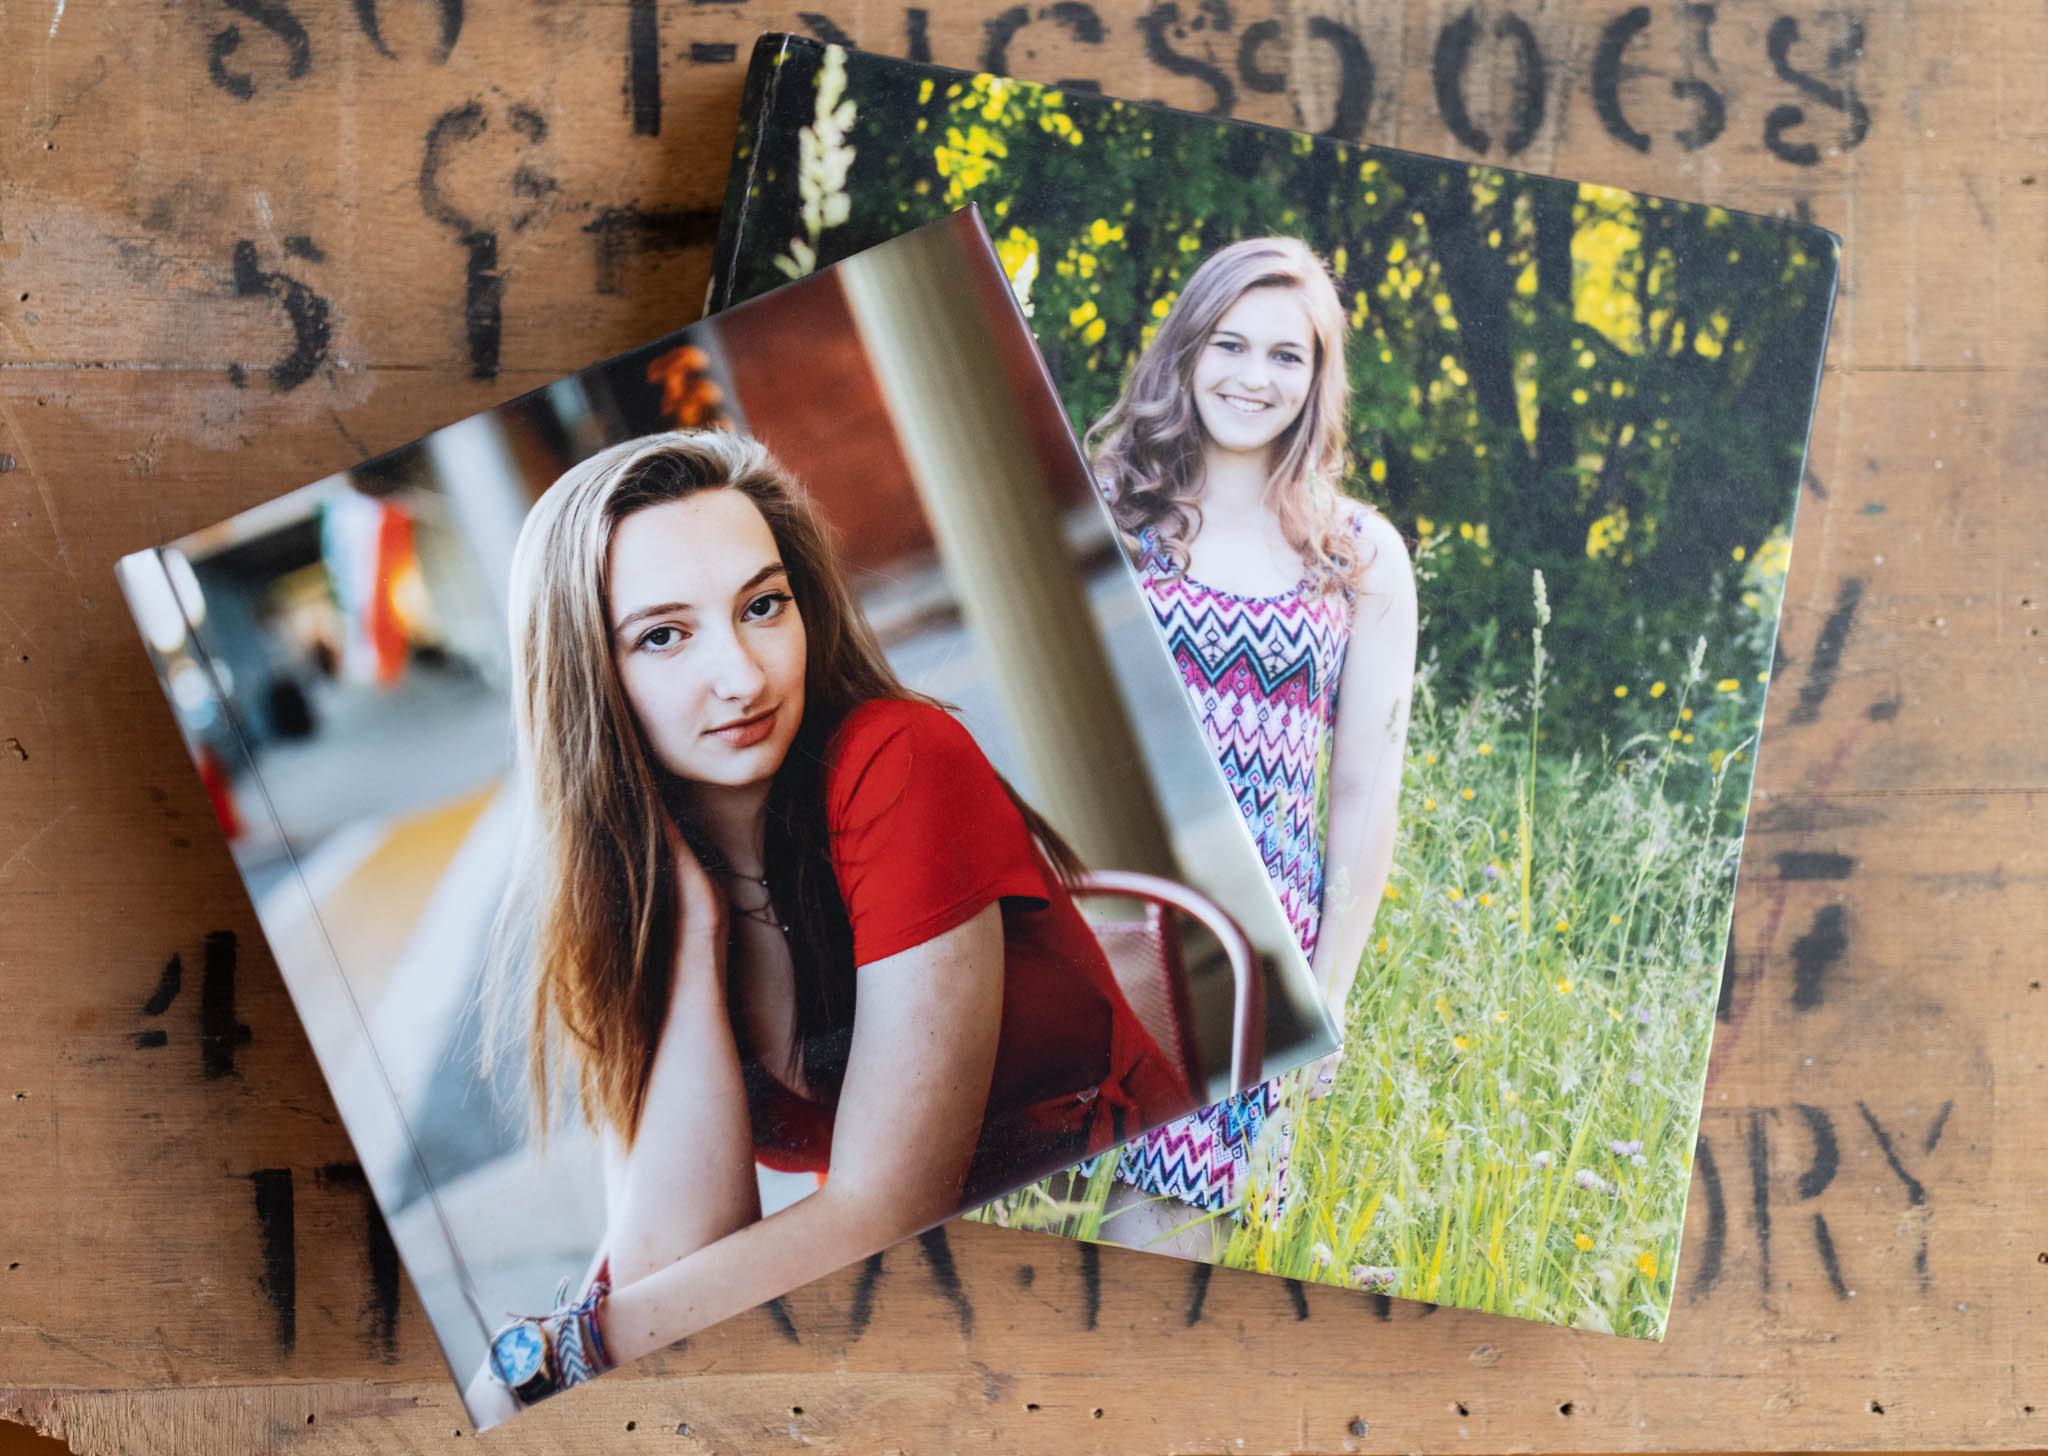 Custom printed photo album covers for high school senior portraits photographed by Sean Wytrwal of J&S Photography near Boston, Massachusetts